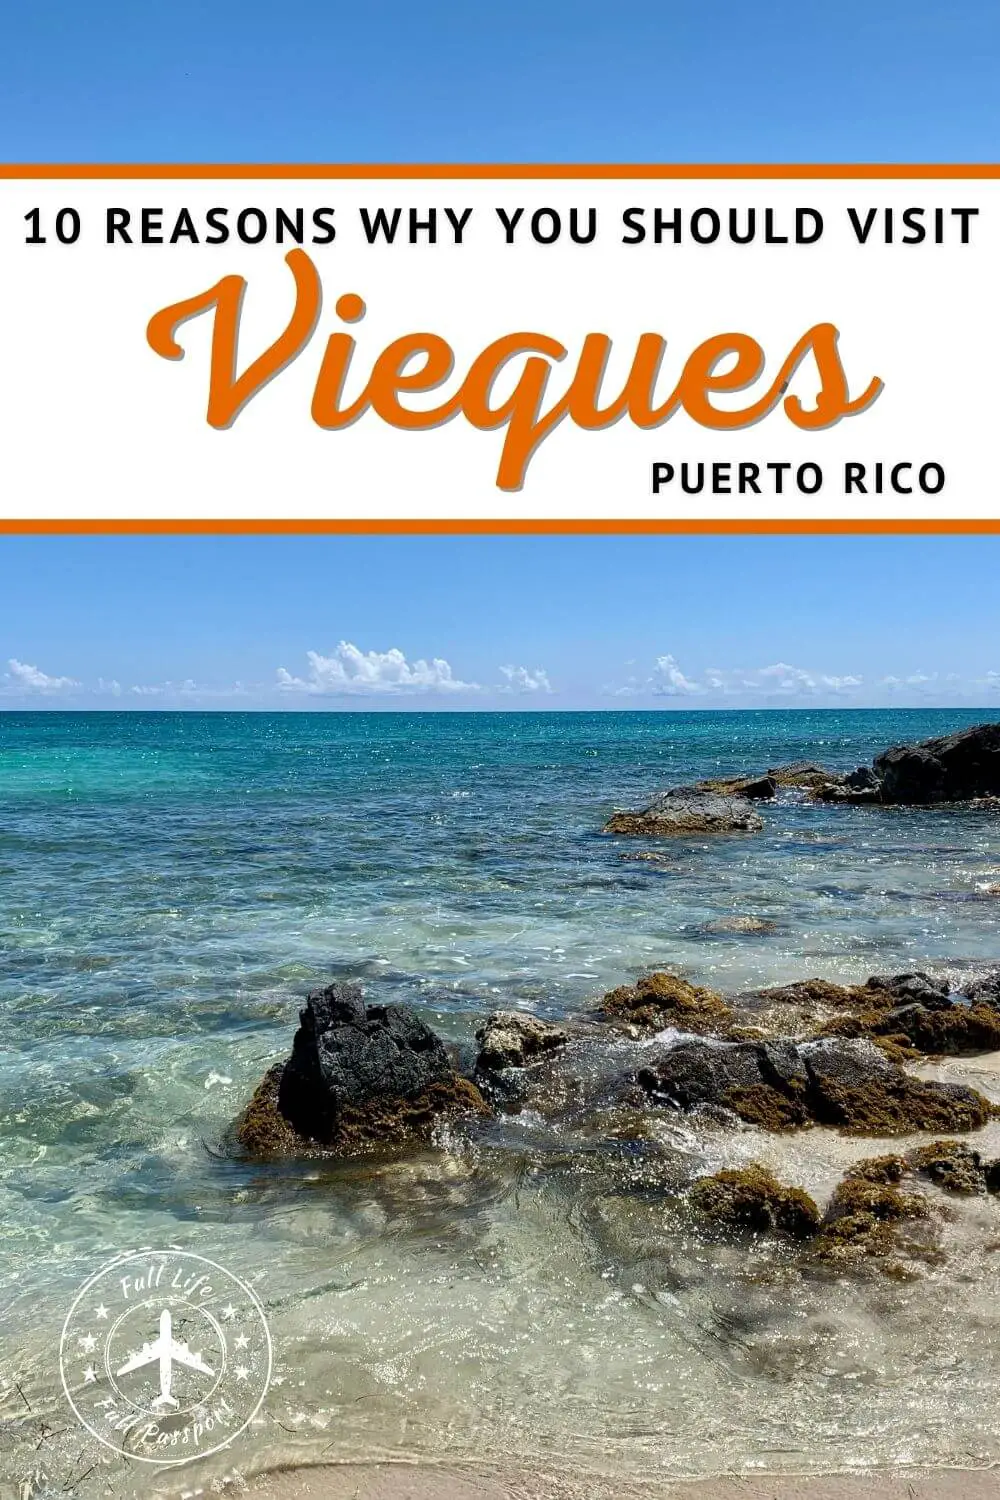 10 Reasons Why You Should Visit Vieques on Your Next Trip to Puerto Rico